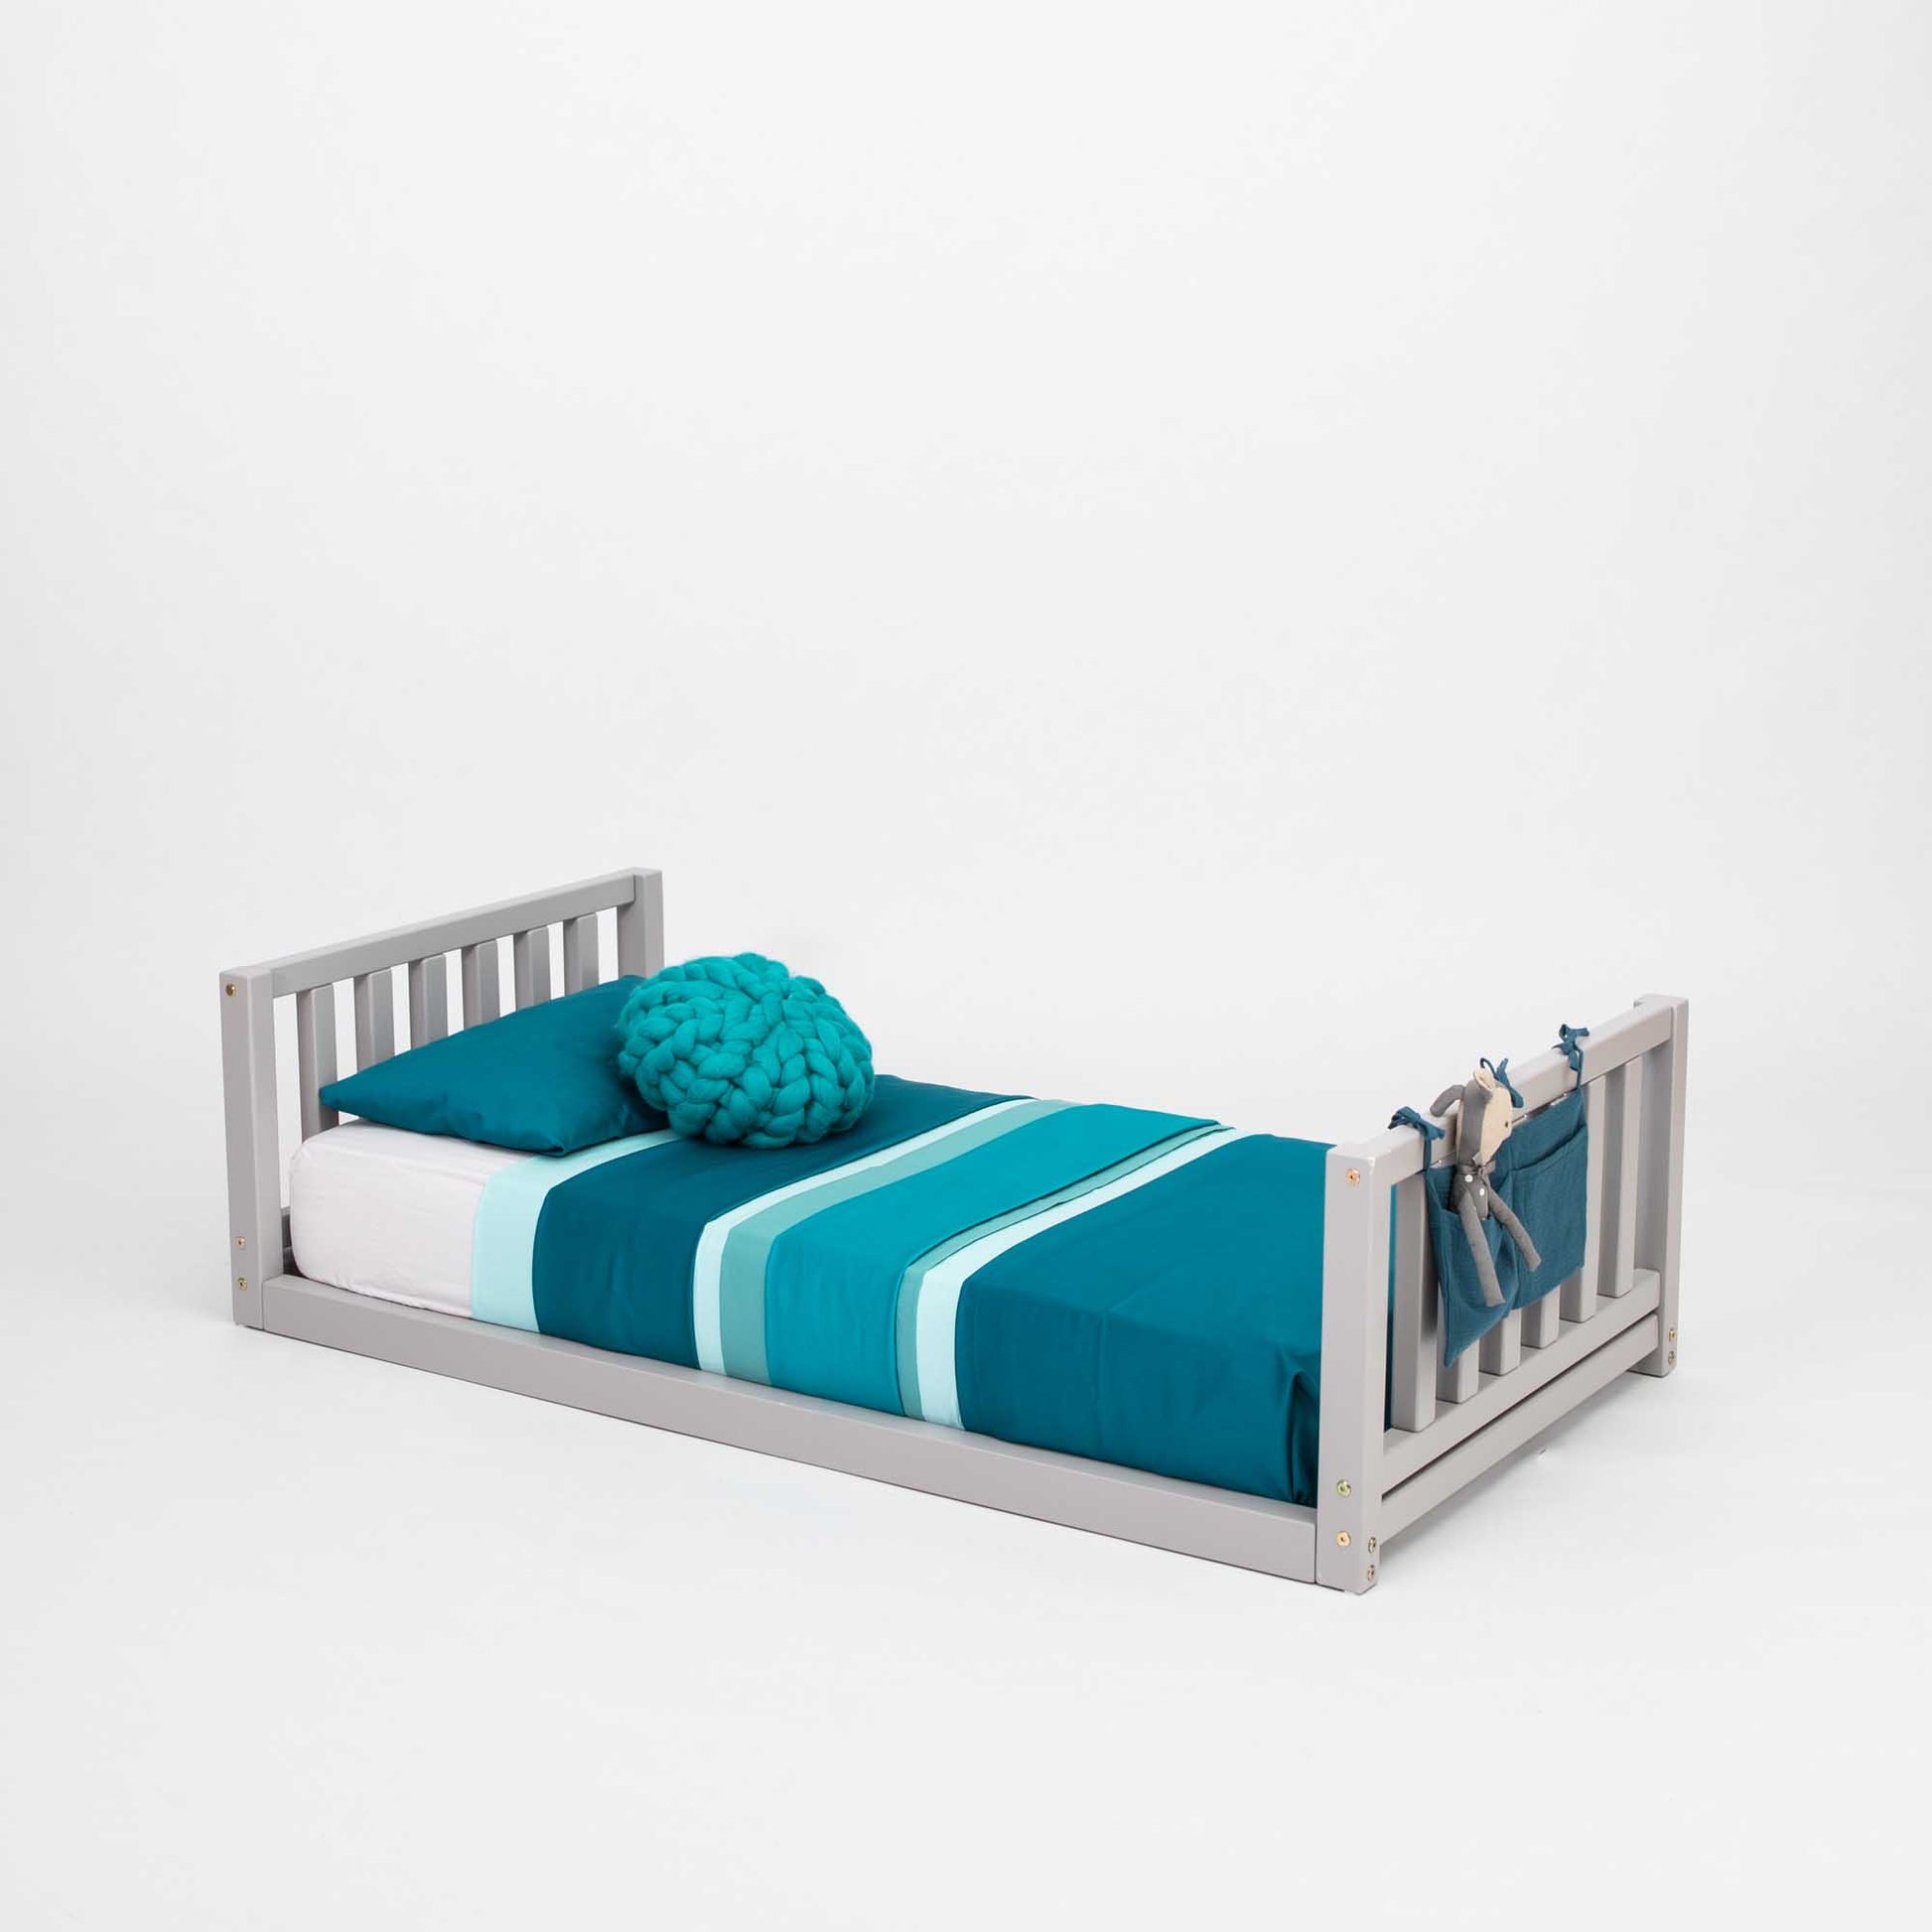 A Sweet Home From Wood Kids' bed with a headboard and footboard, with blue and teal bedding for boys and girls.